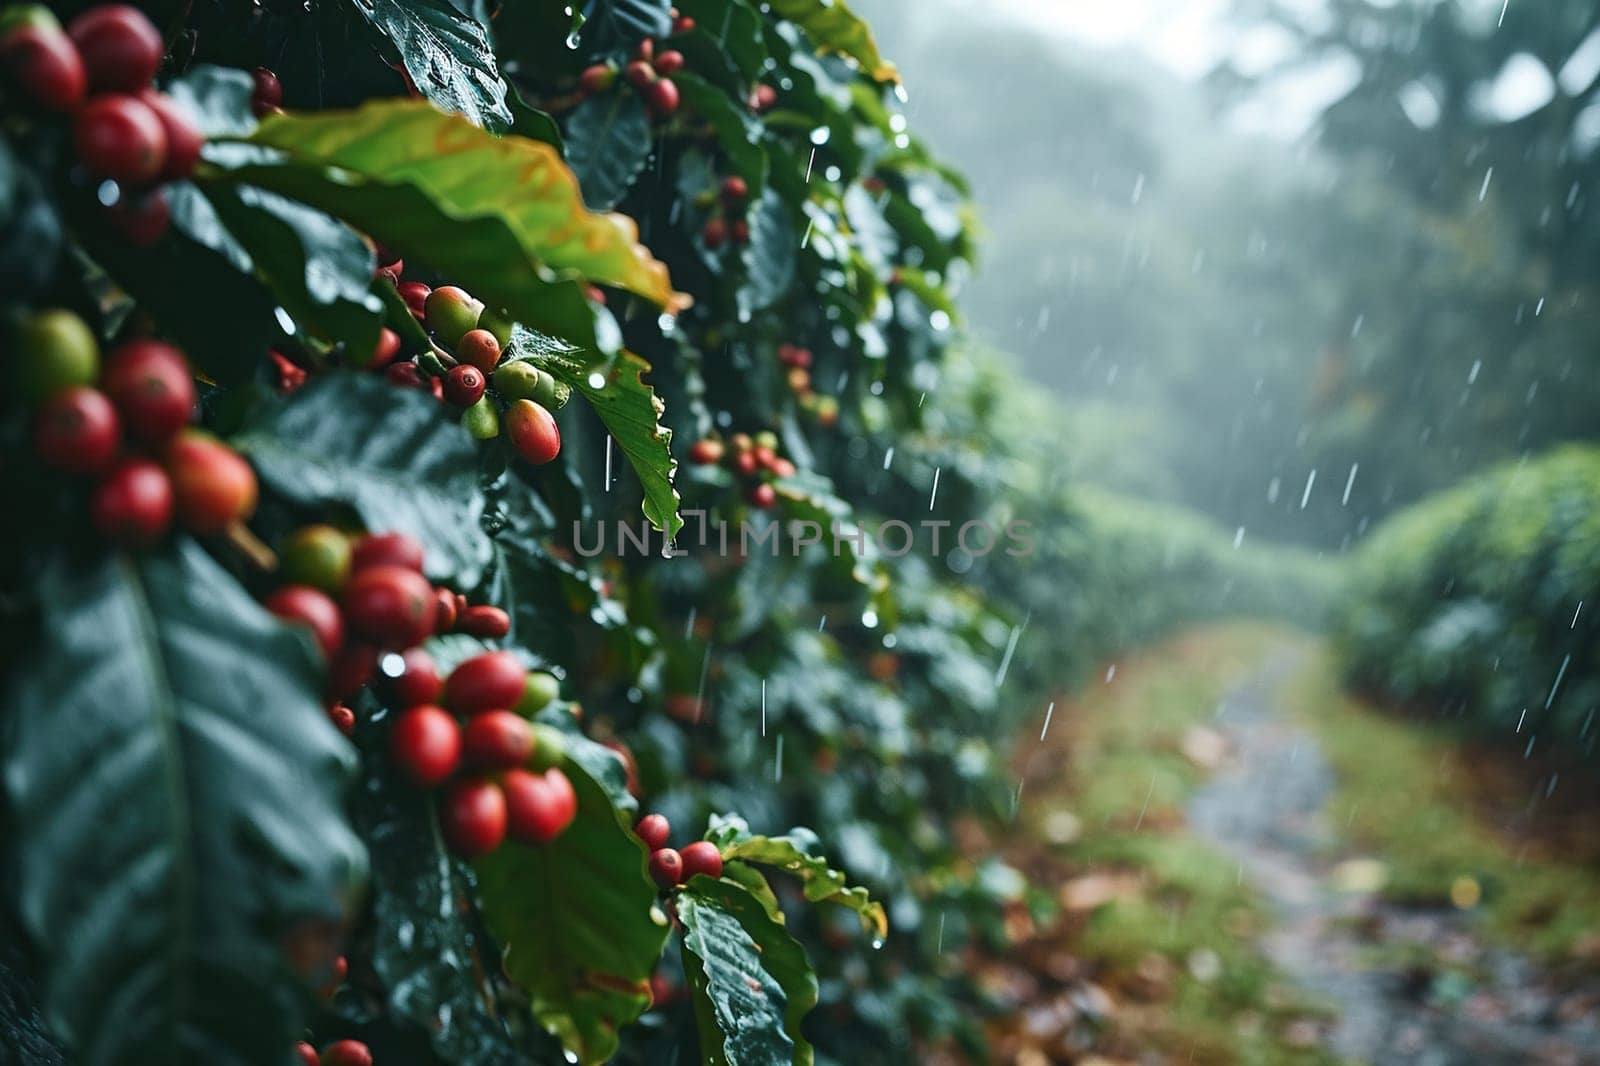 Coffee bushes with ripe coffee beans in the rain.